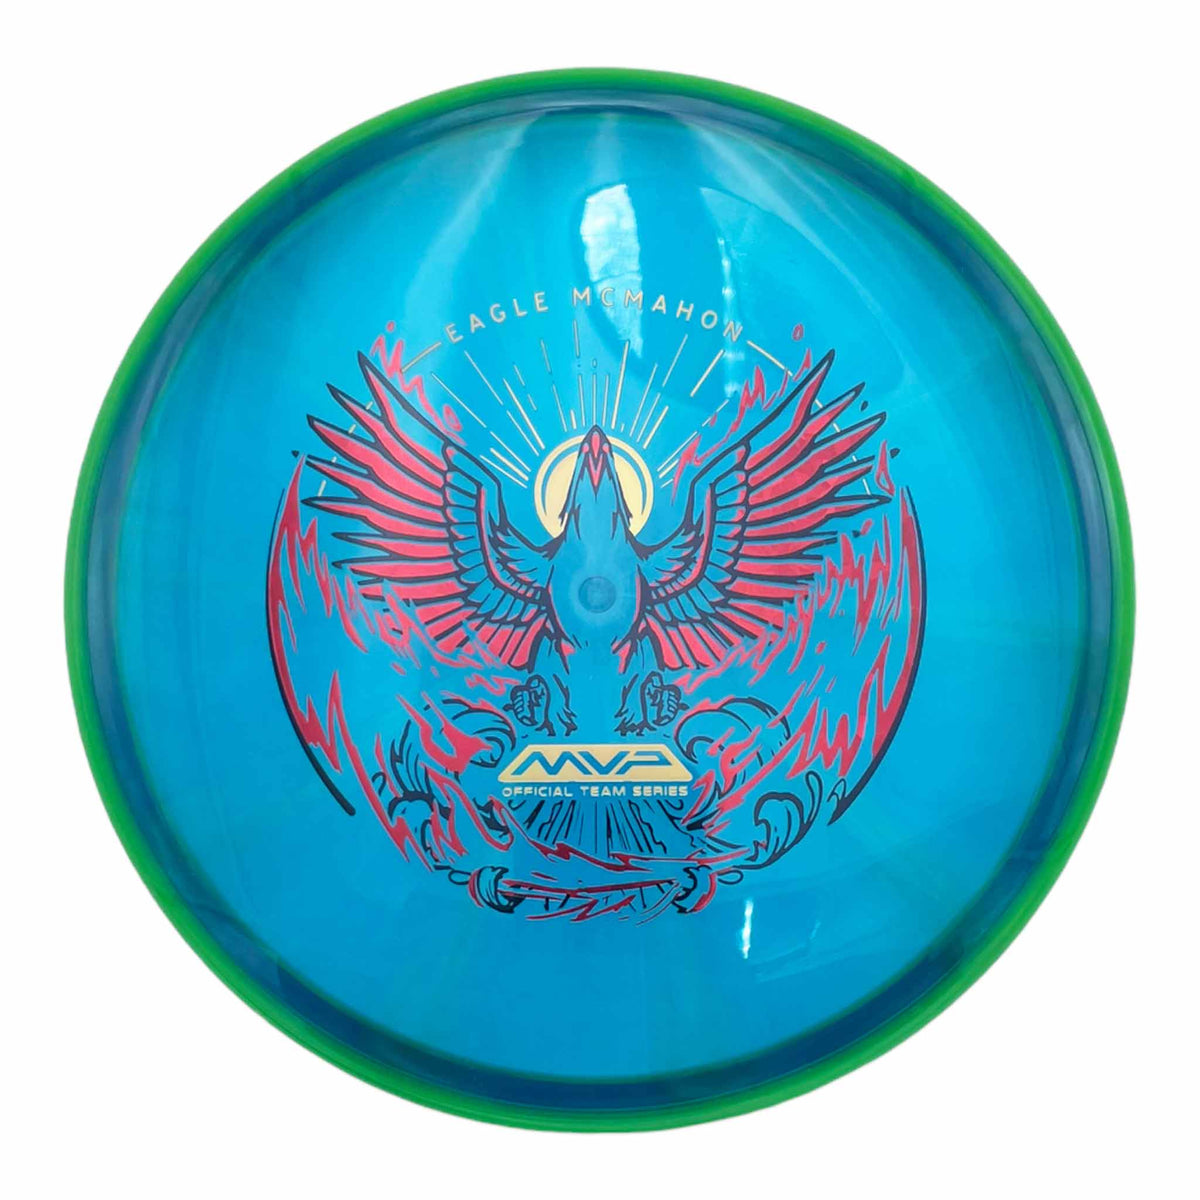 Axiom Discs Prism Proton Eagle McMahon Envy putter and approach - Blue / Green